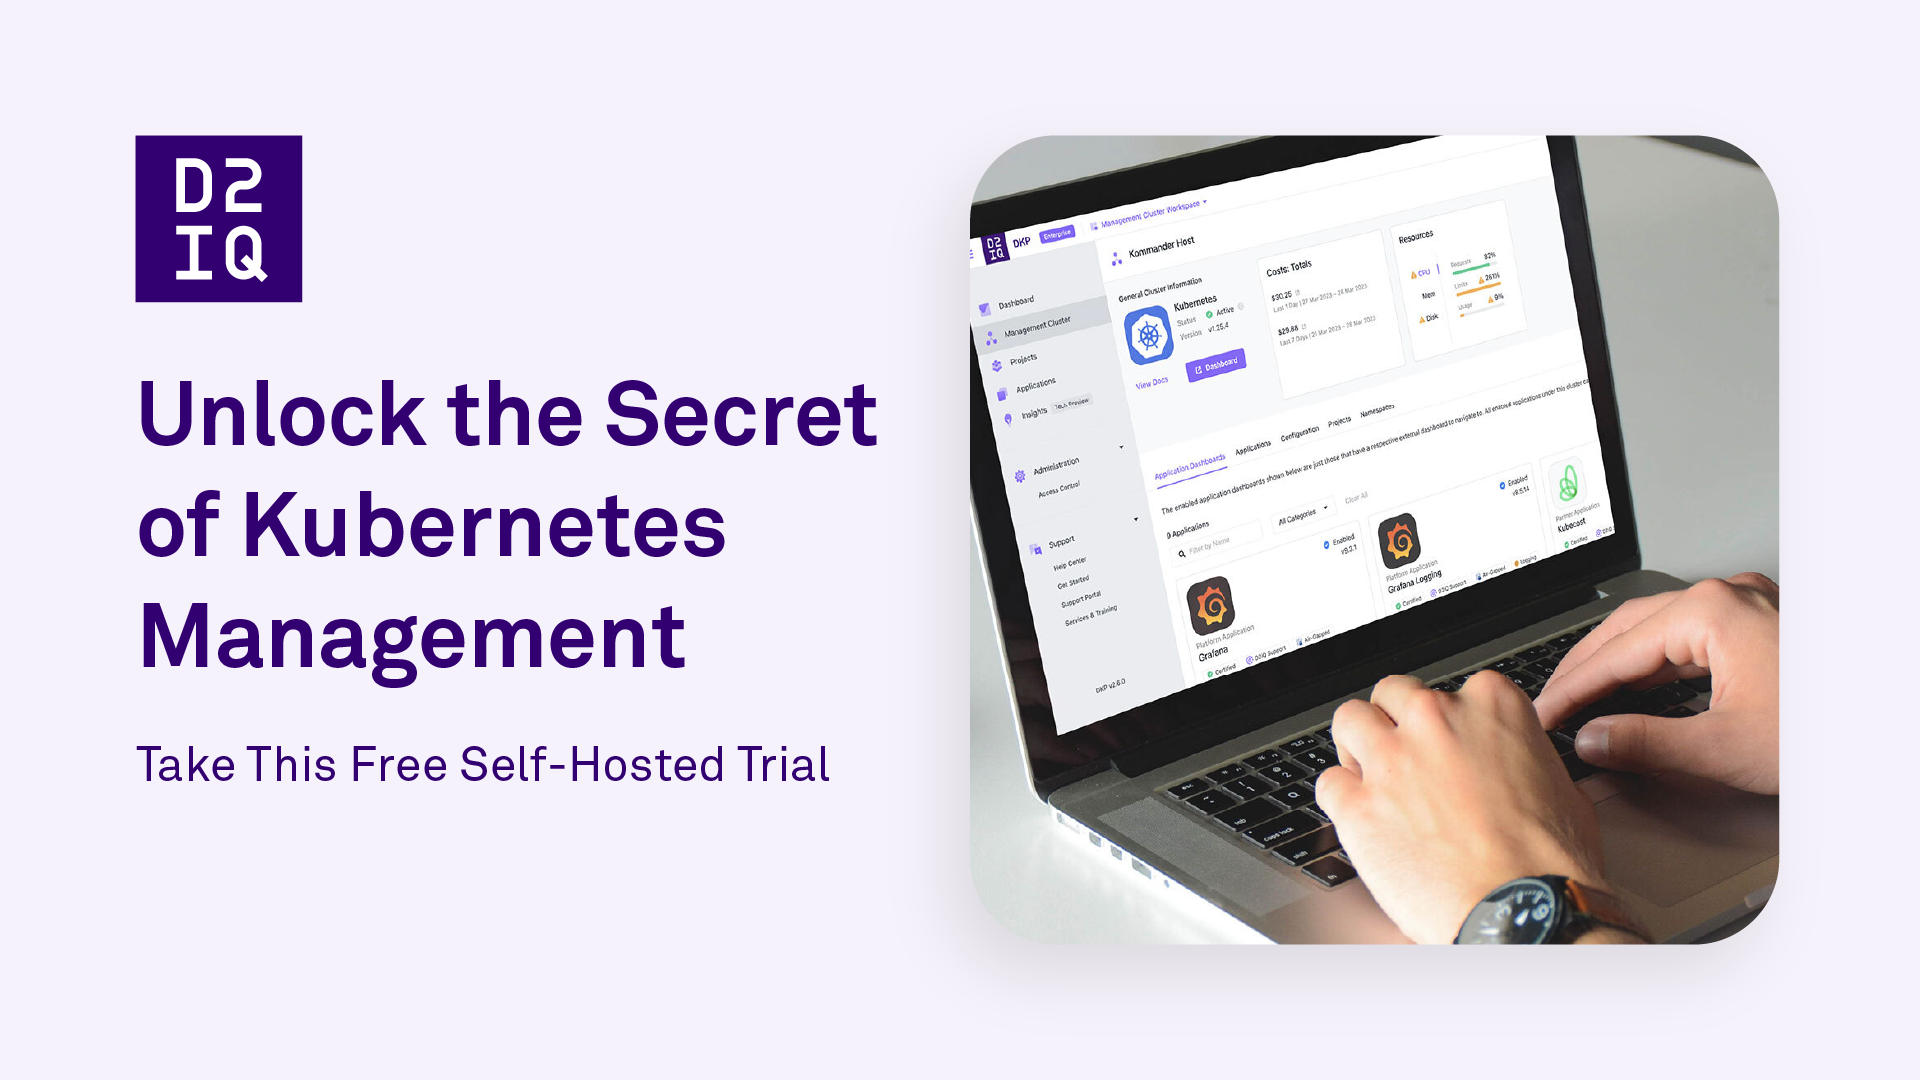 The Secret of Kubernetes Management: Free Self-Hosted Trial | D2iQ